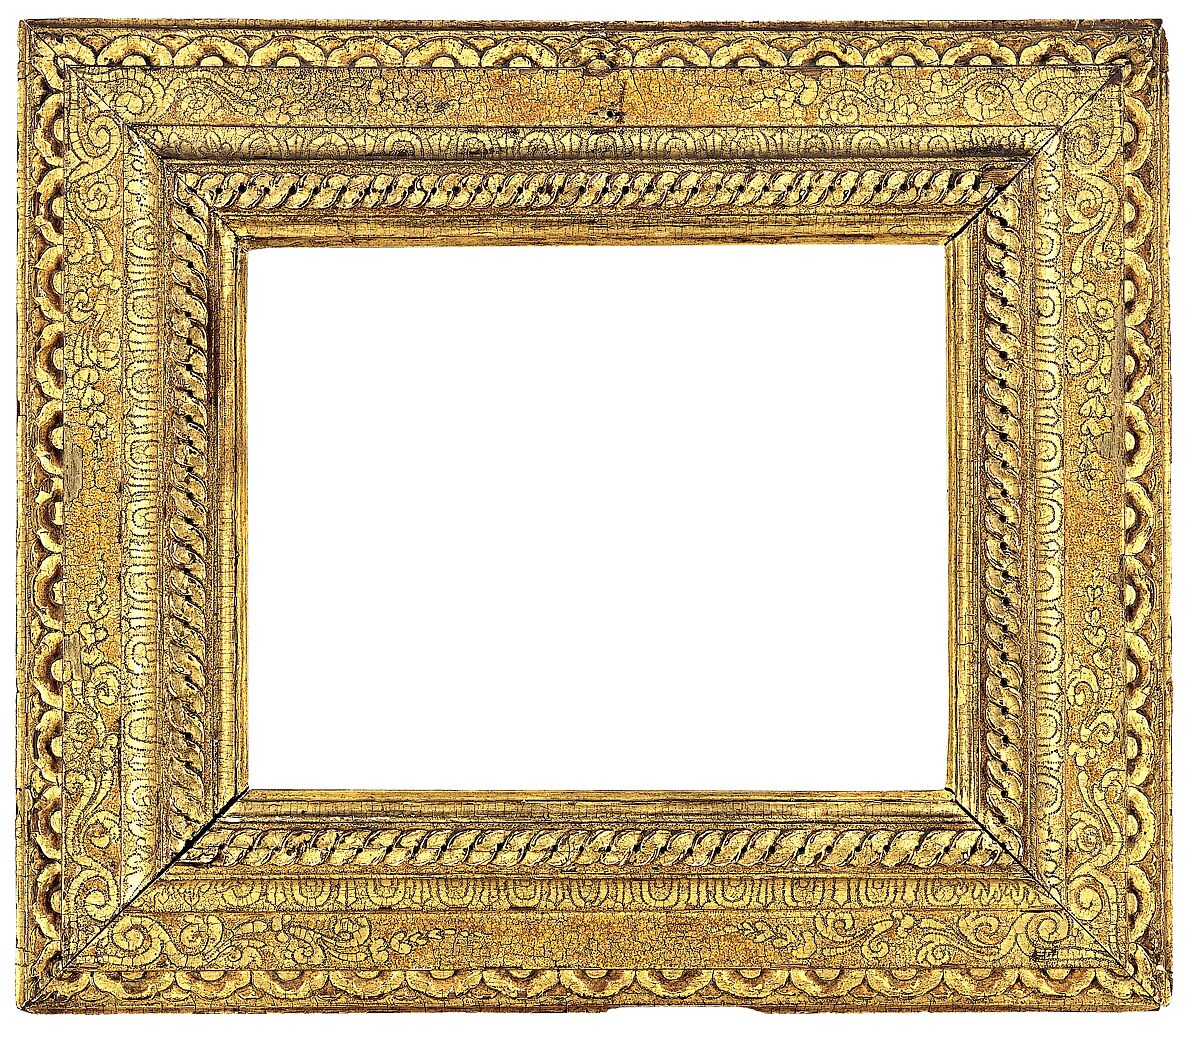 Reverse cassetta frame, Oak. Carved, gilt; brown-red bole, dragon's blood., Southern French 